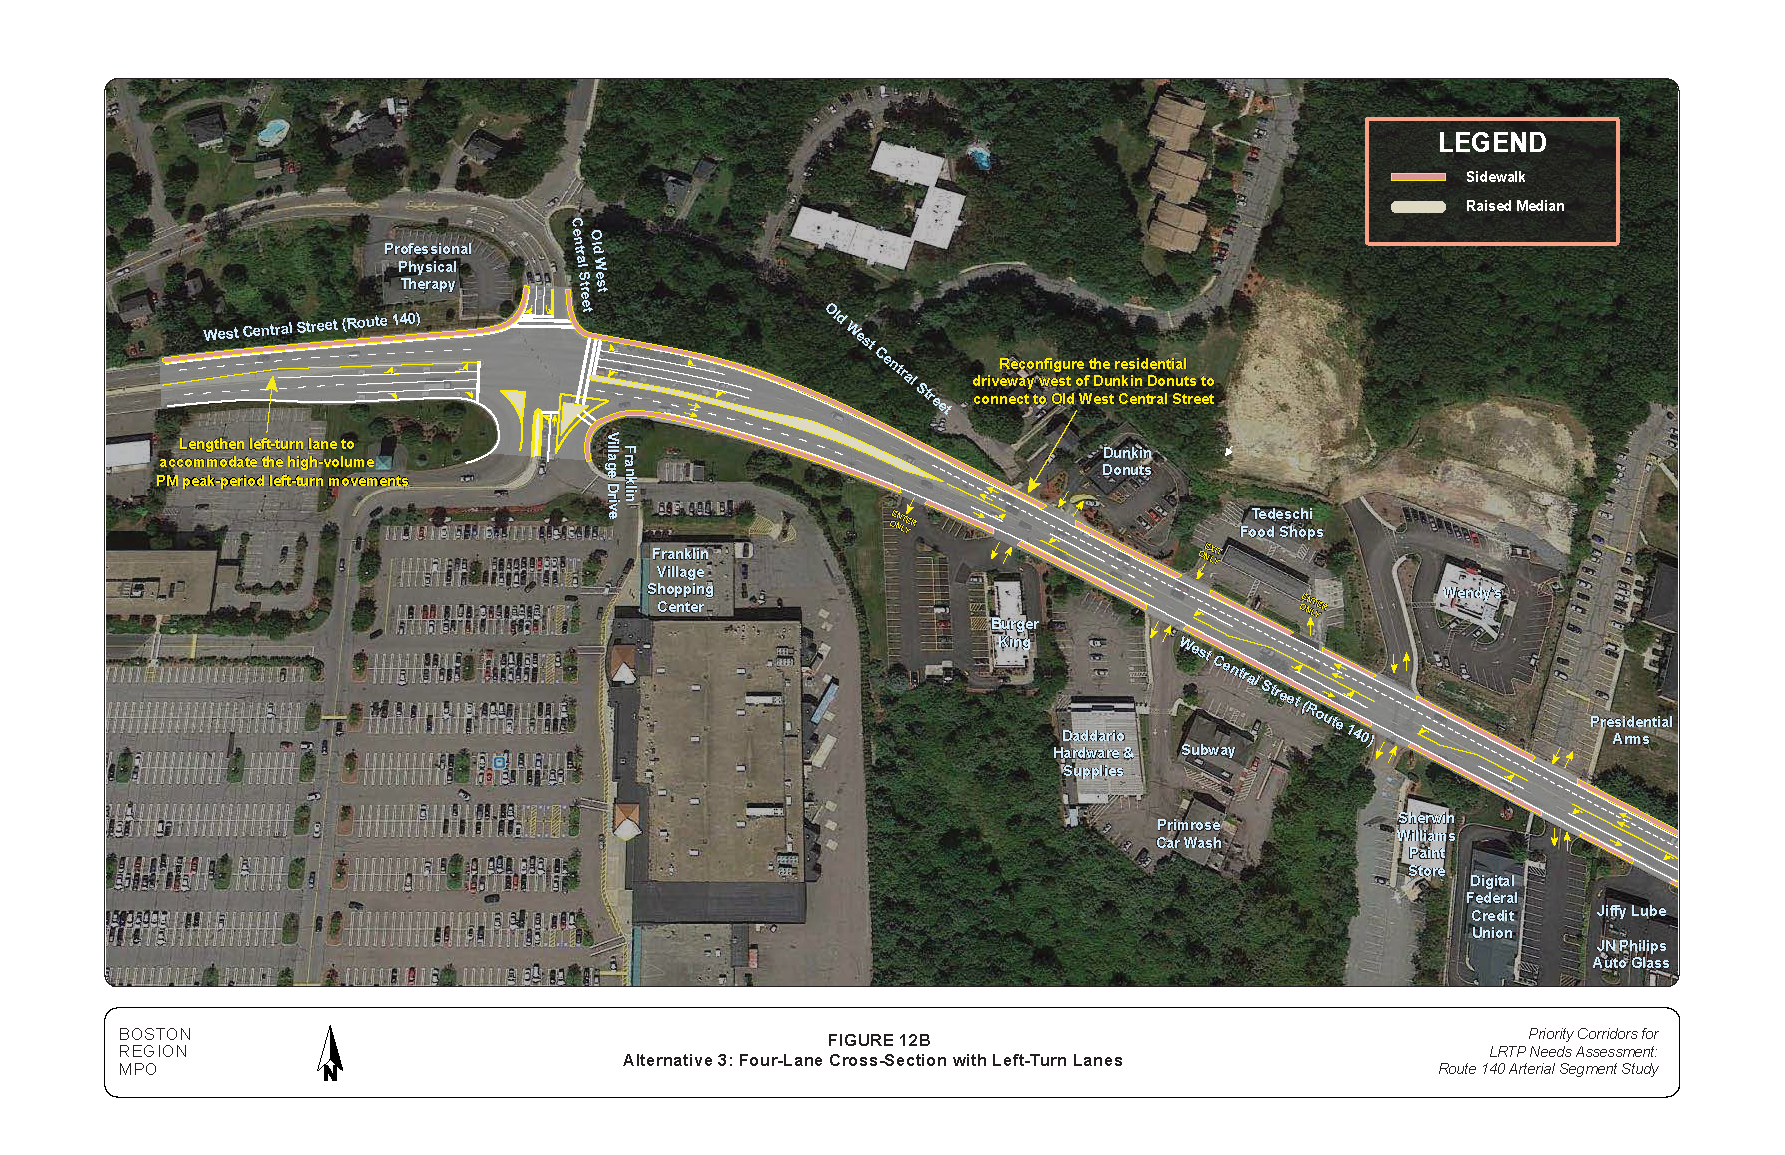 FIGURE 12B: Alternative 3: Four-Lane Cross-Section with Left-Turn Lanes. Aerial-view map that illustrates MPO staff “Improvement Alternative 3,” which recommends reconfiguring West Central Street into a three-lane cross-section with left-turn lanes.